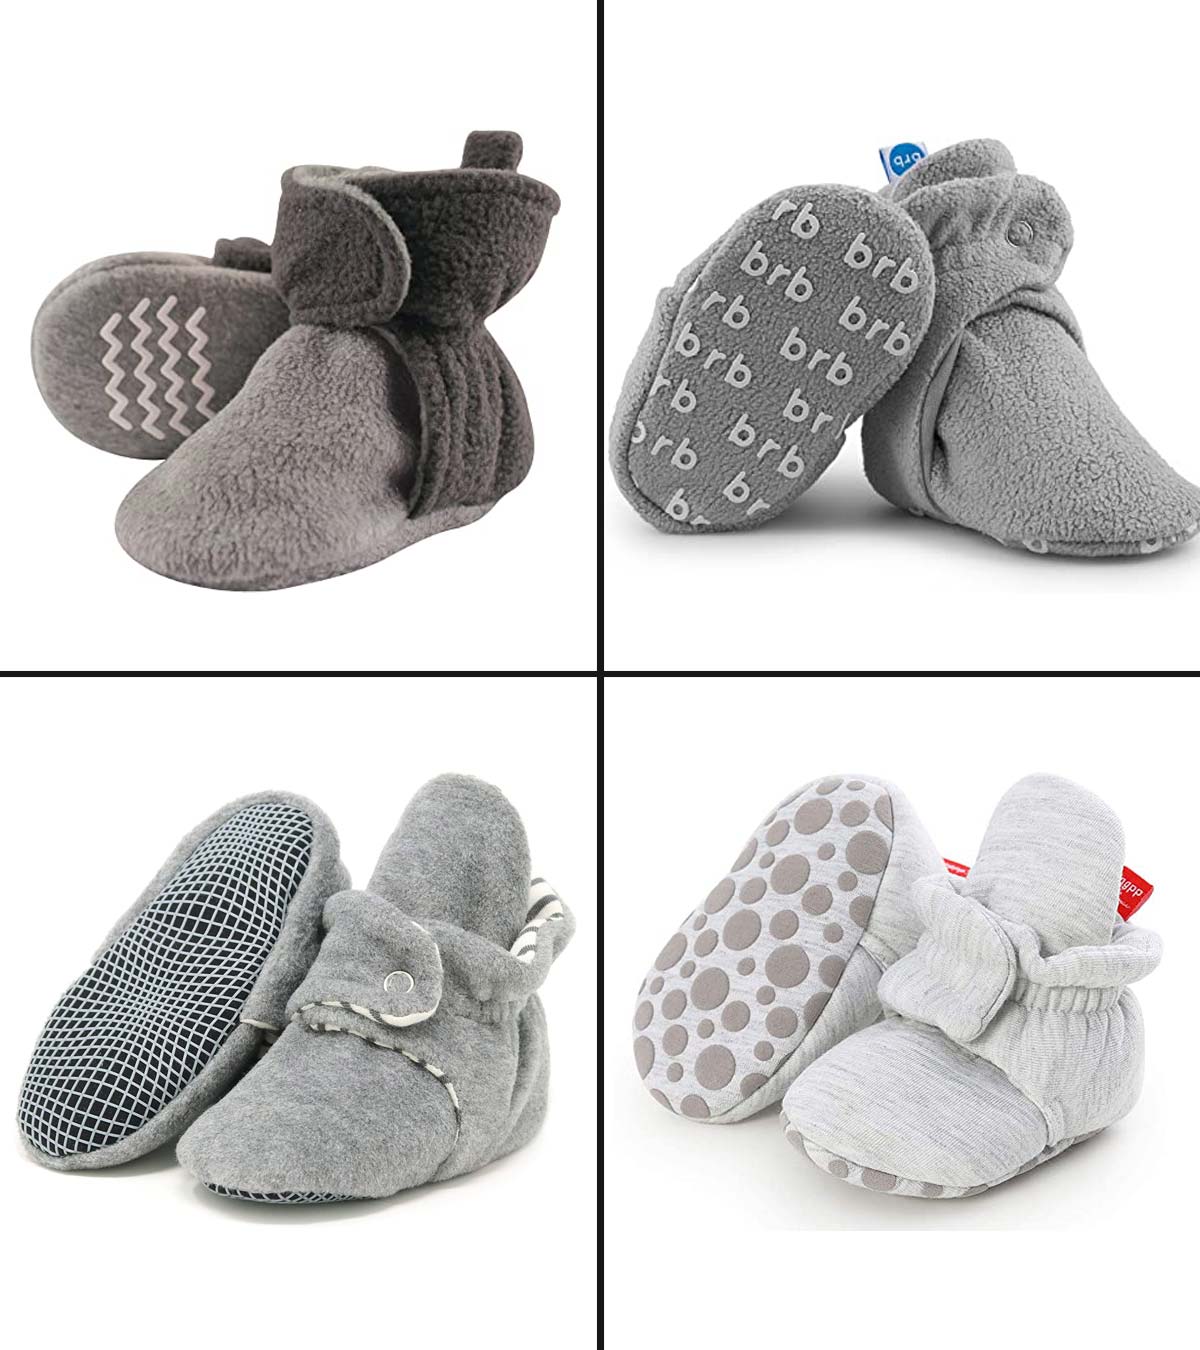 15 Best Baby Booties In 2023 To Keep Their Feet Warm and Cozy